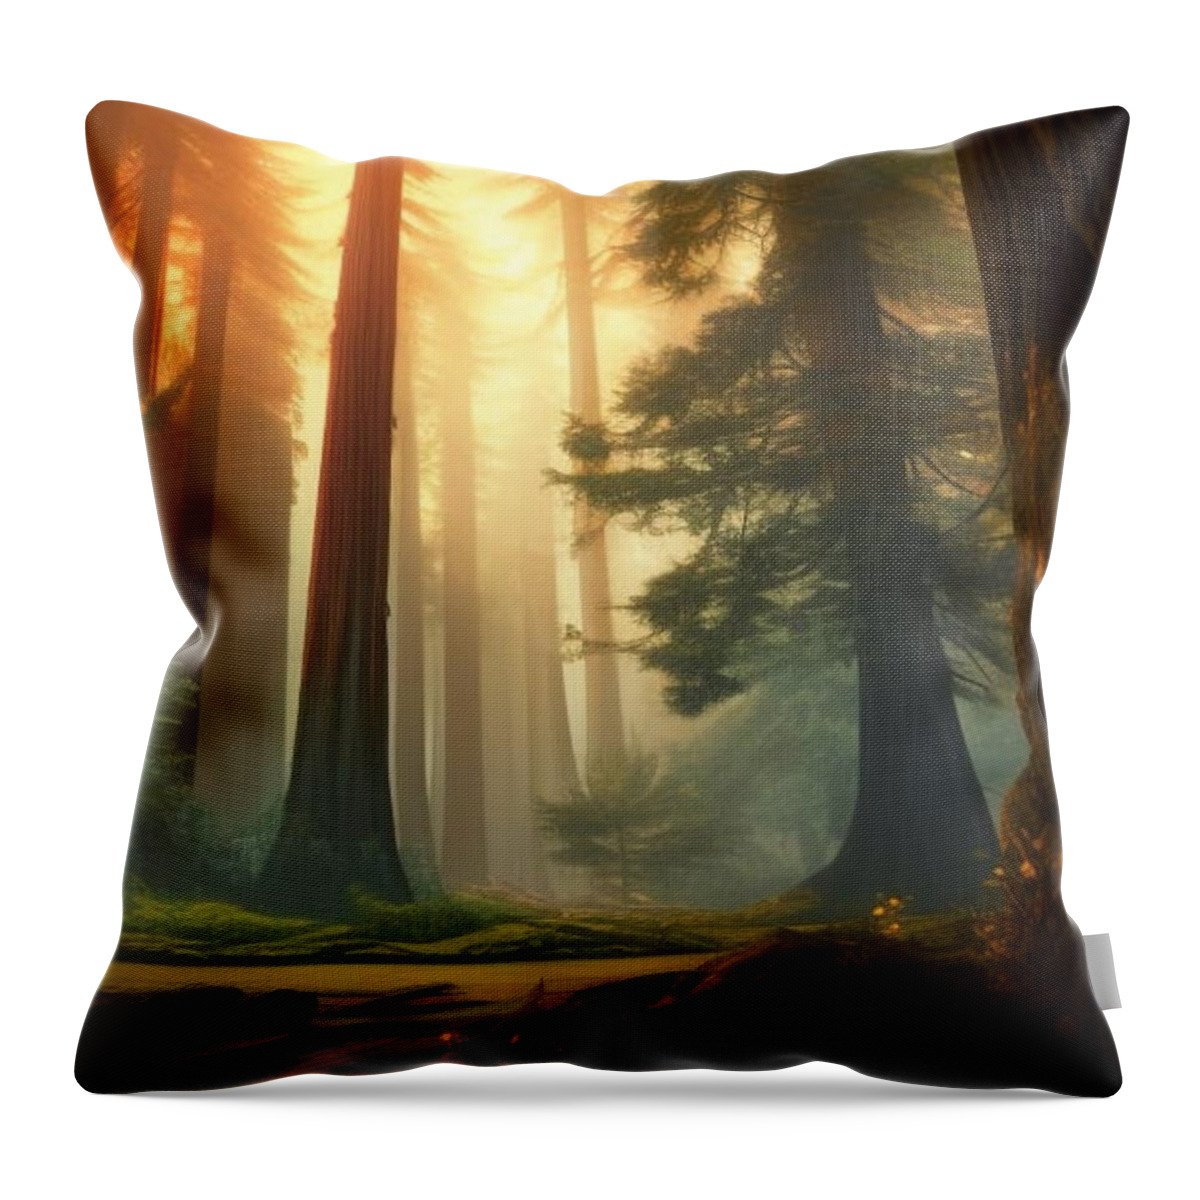 Redwoods Throw Pillow featuring the digital art Redwood Forest by Michael Galvin